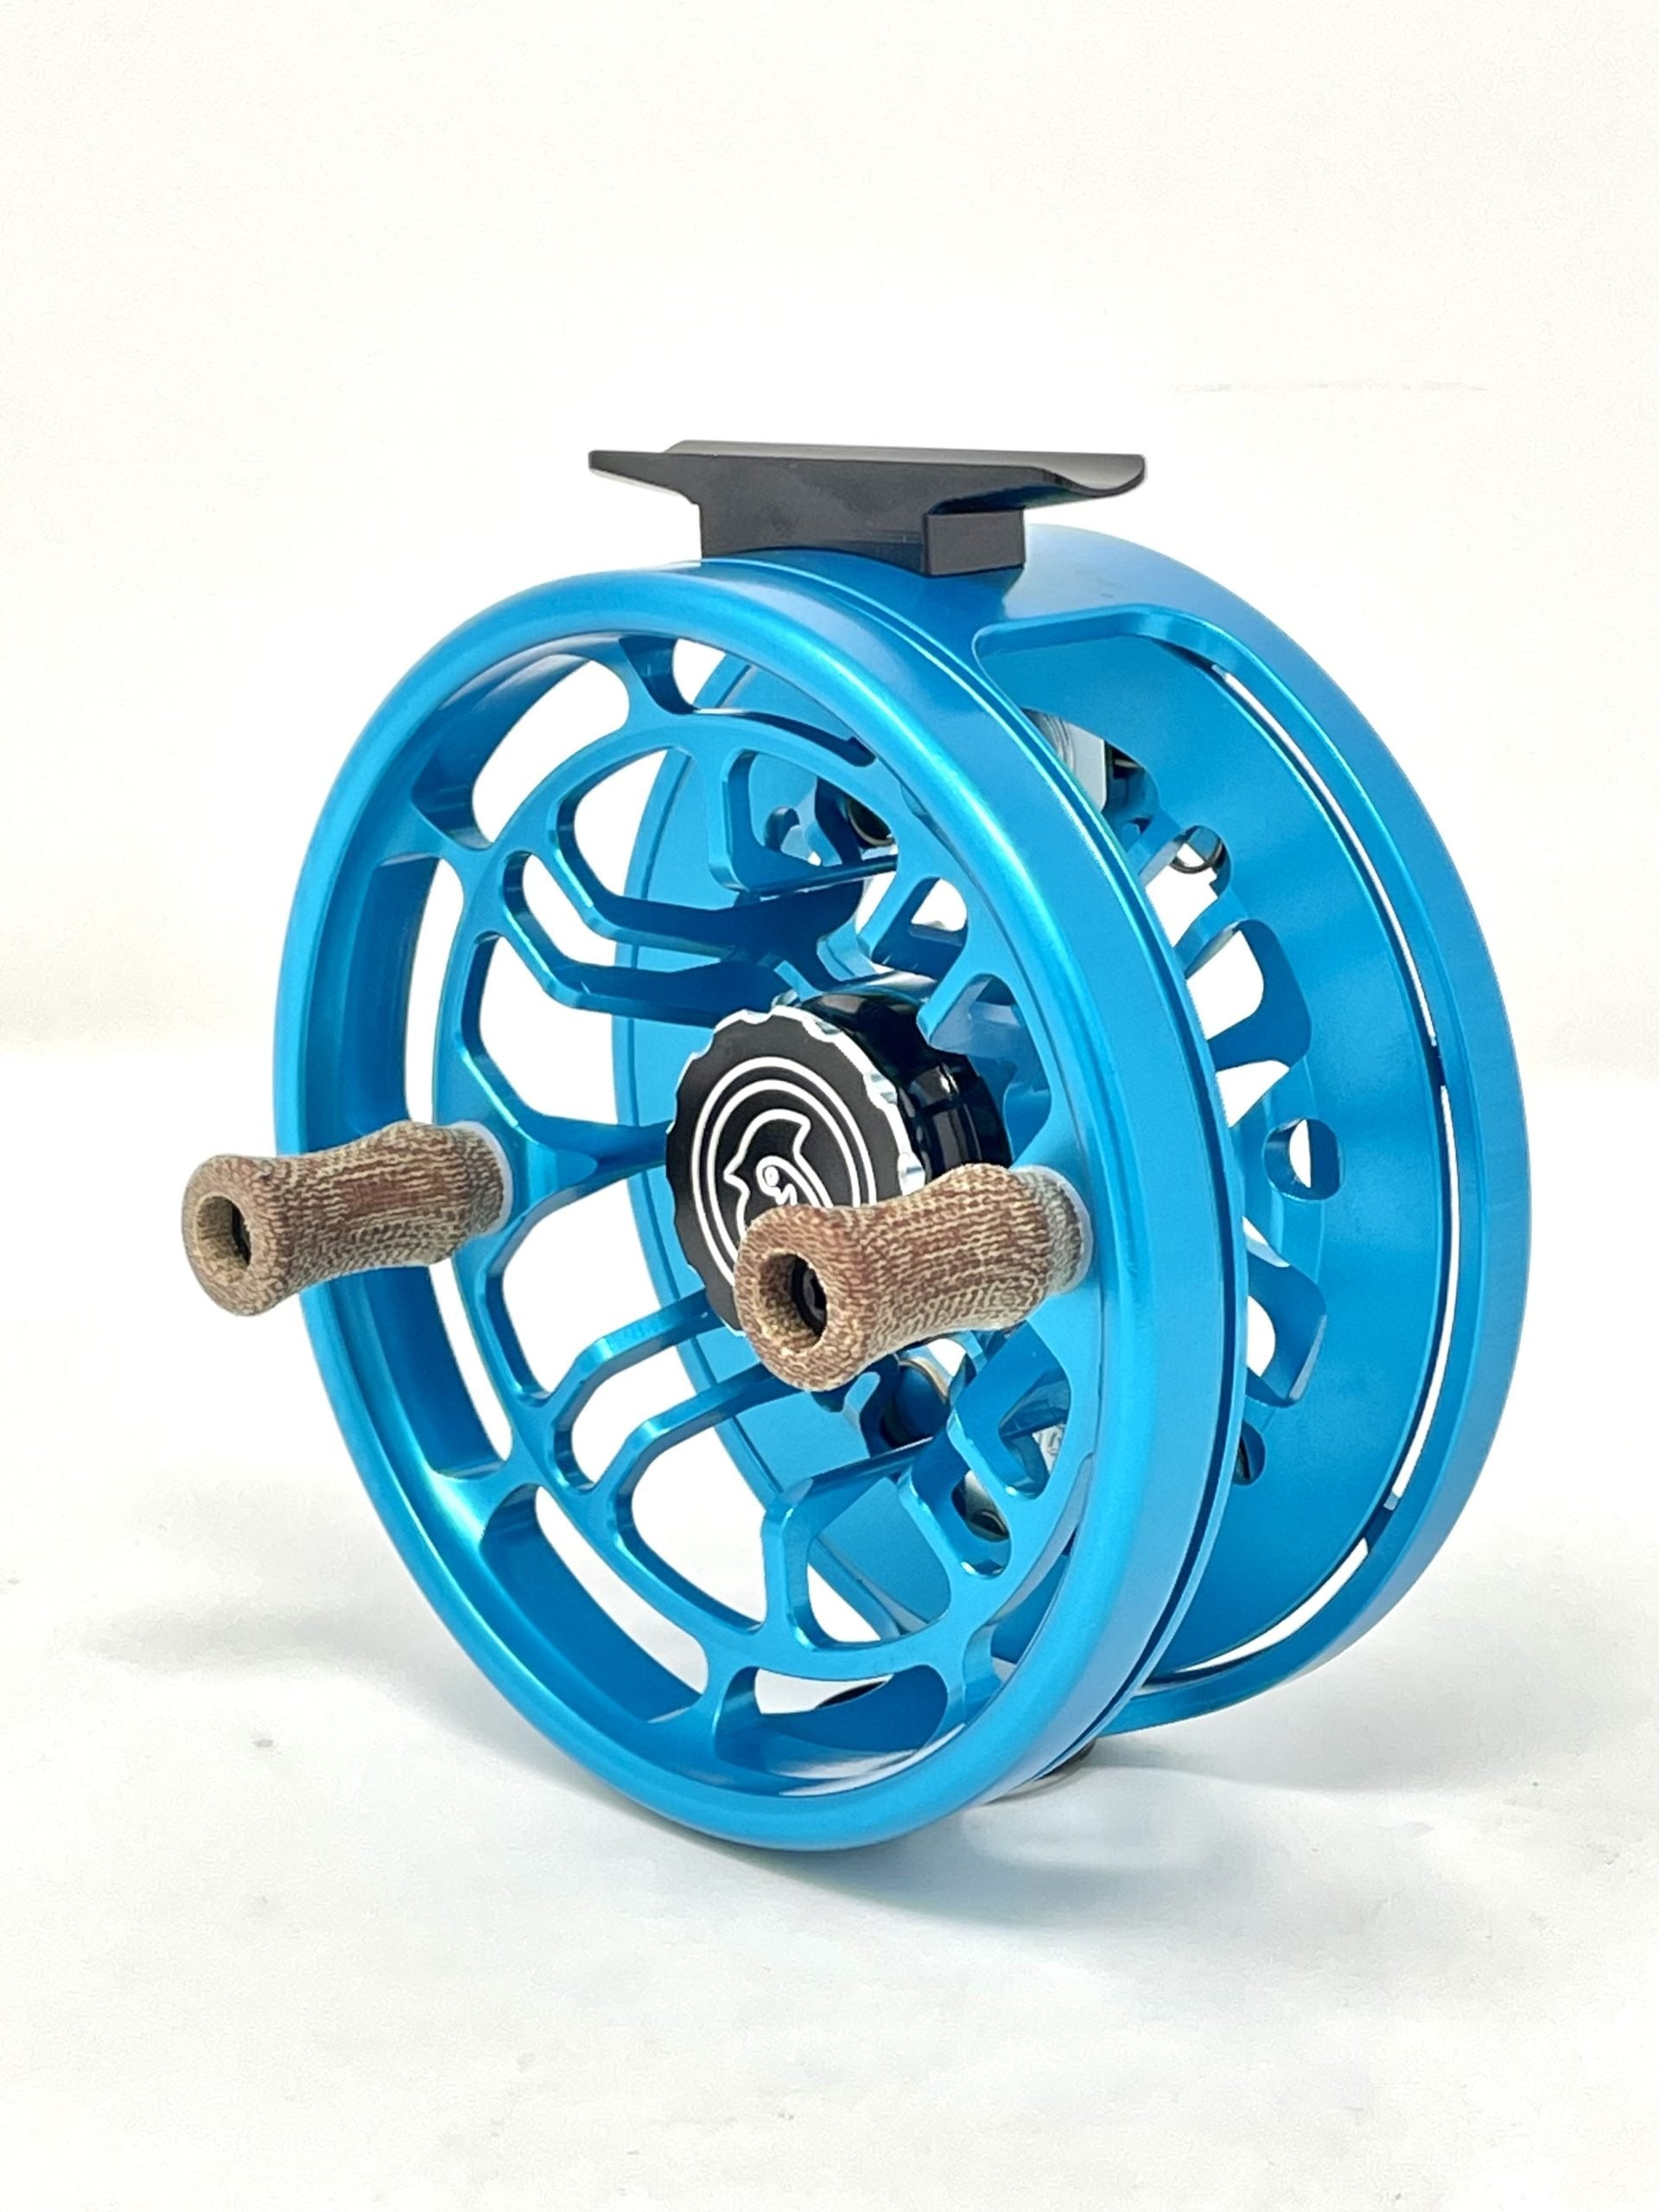 Cubalaya Fair Chase G2 Click Pawl Fly Reel- Clear on Blue